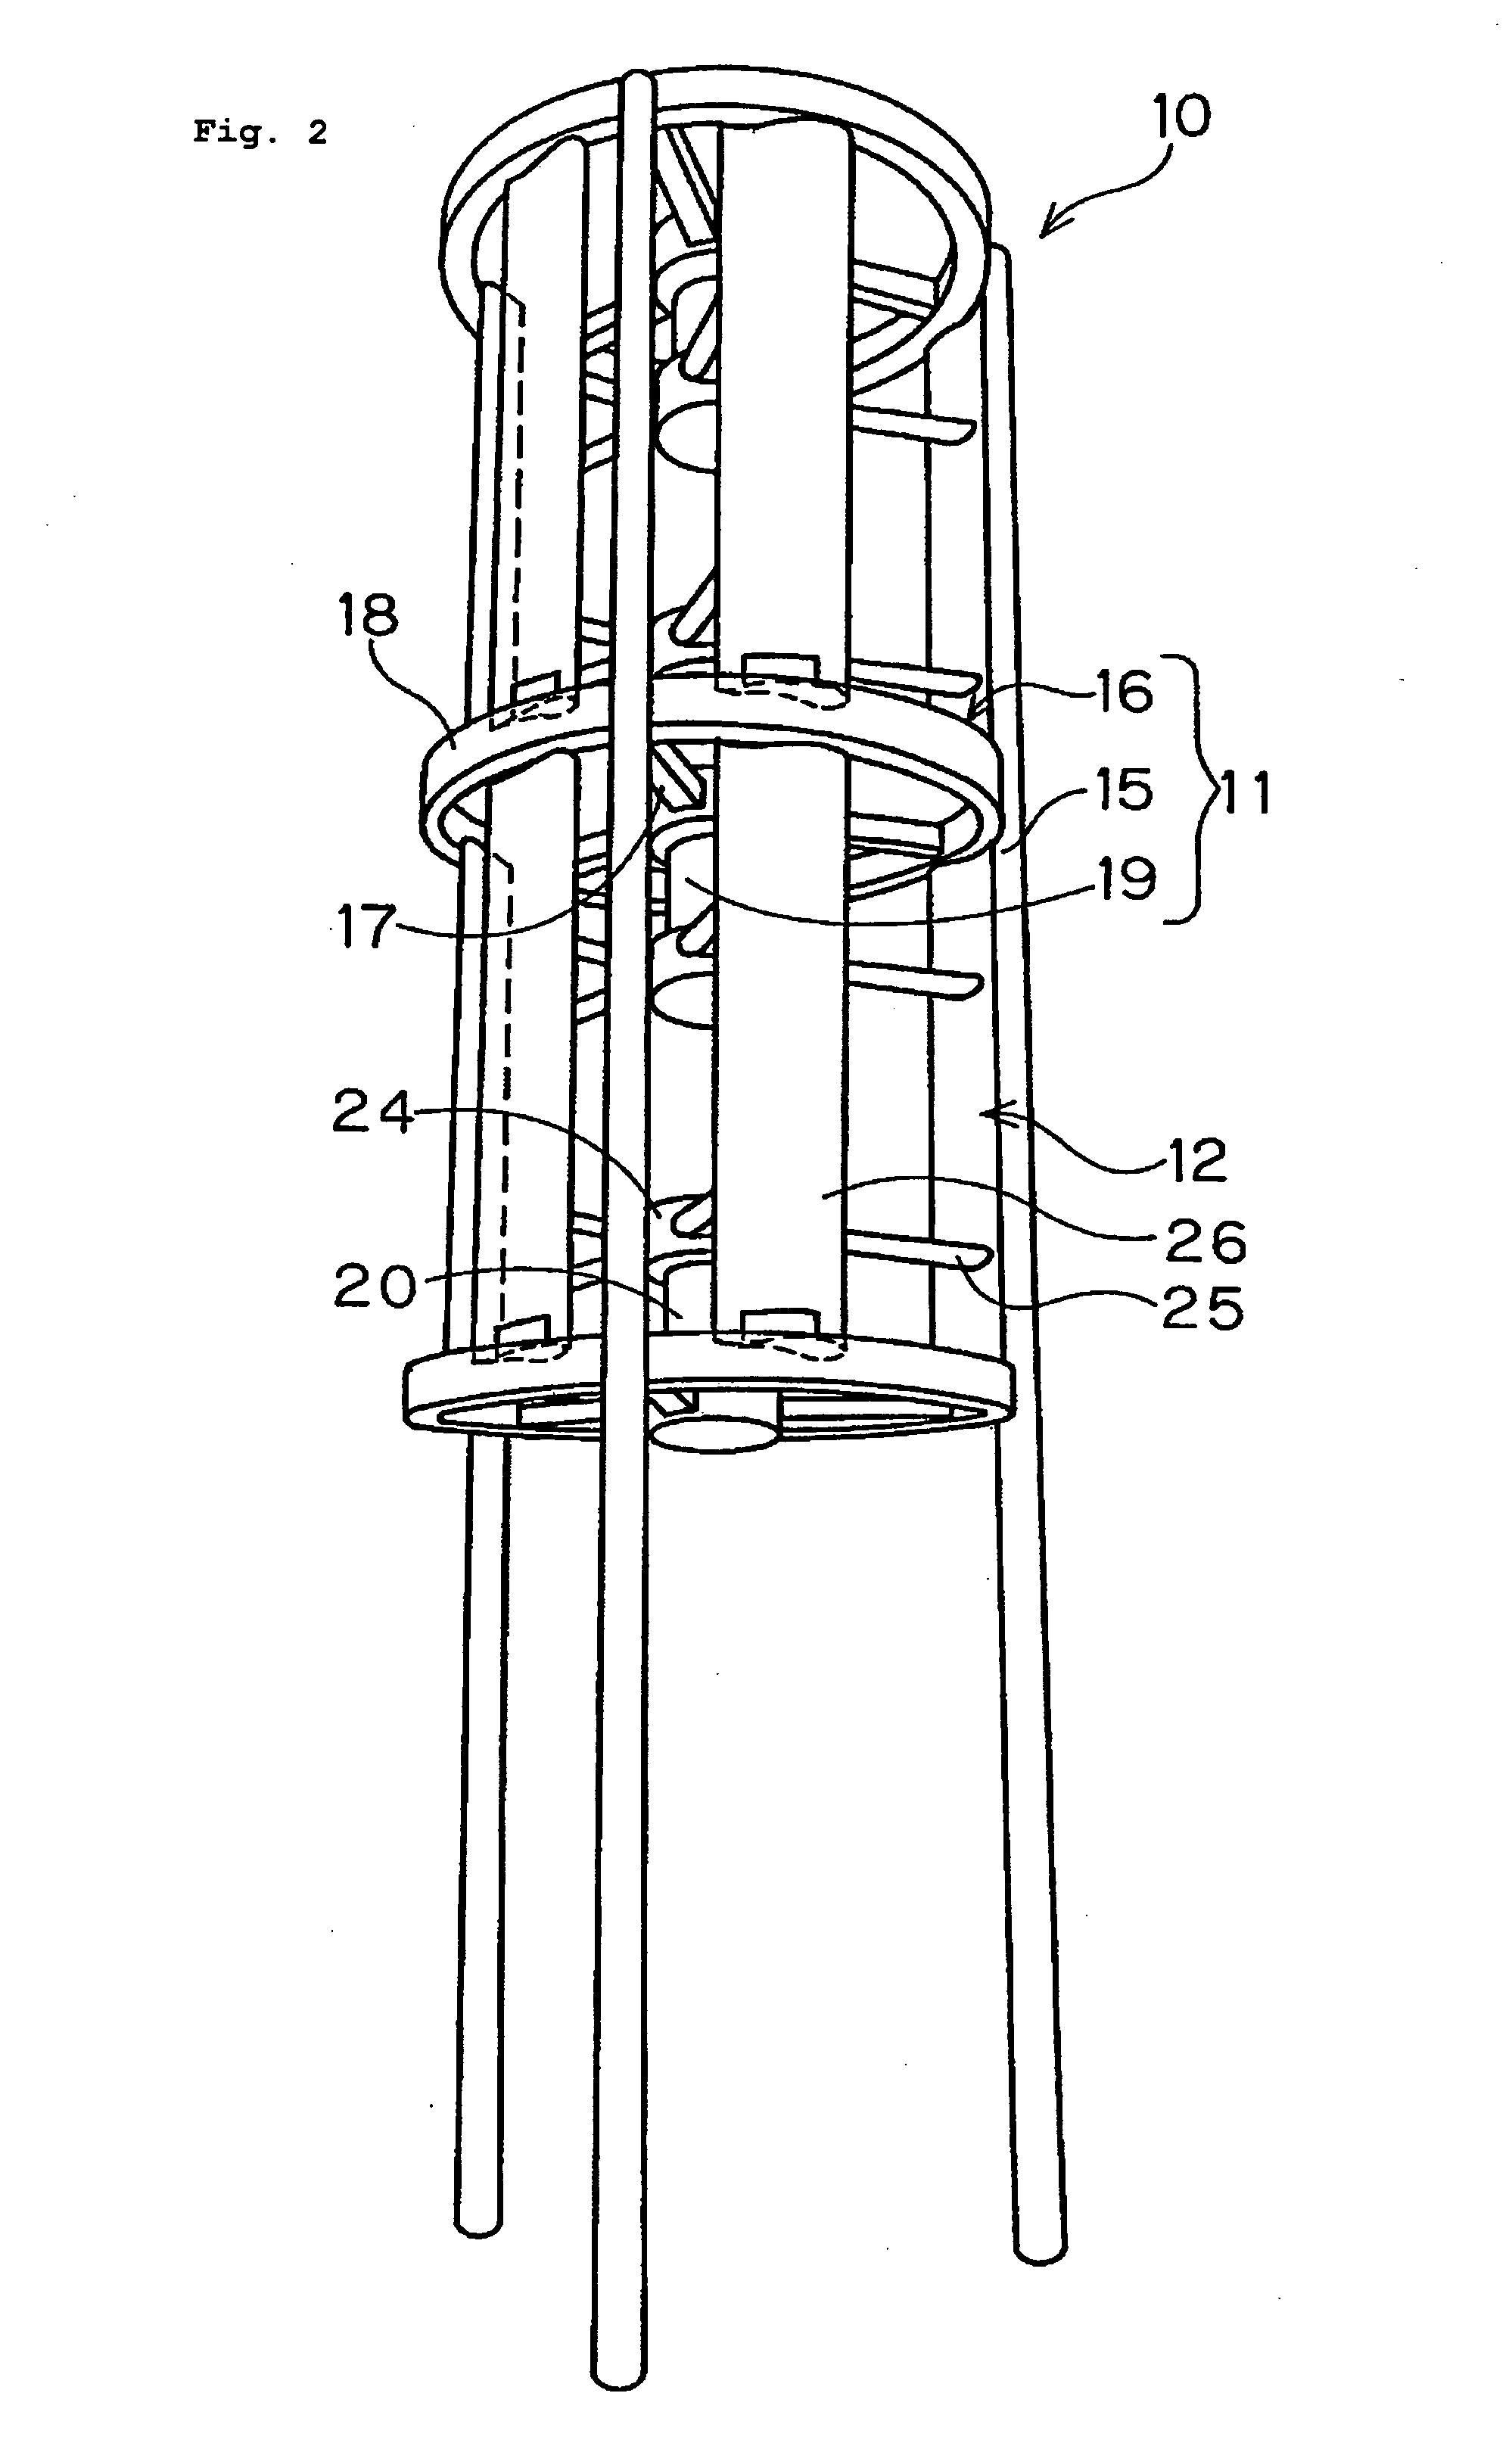 Wind power generation system, arrangement of permanent magnets, and electrical power-mechanical force converter